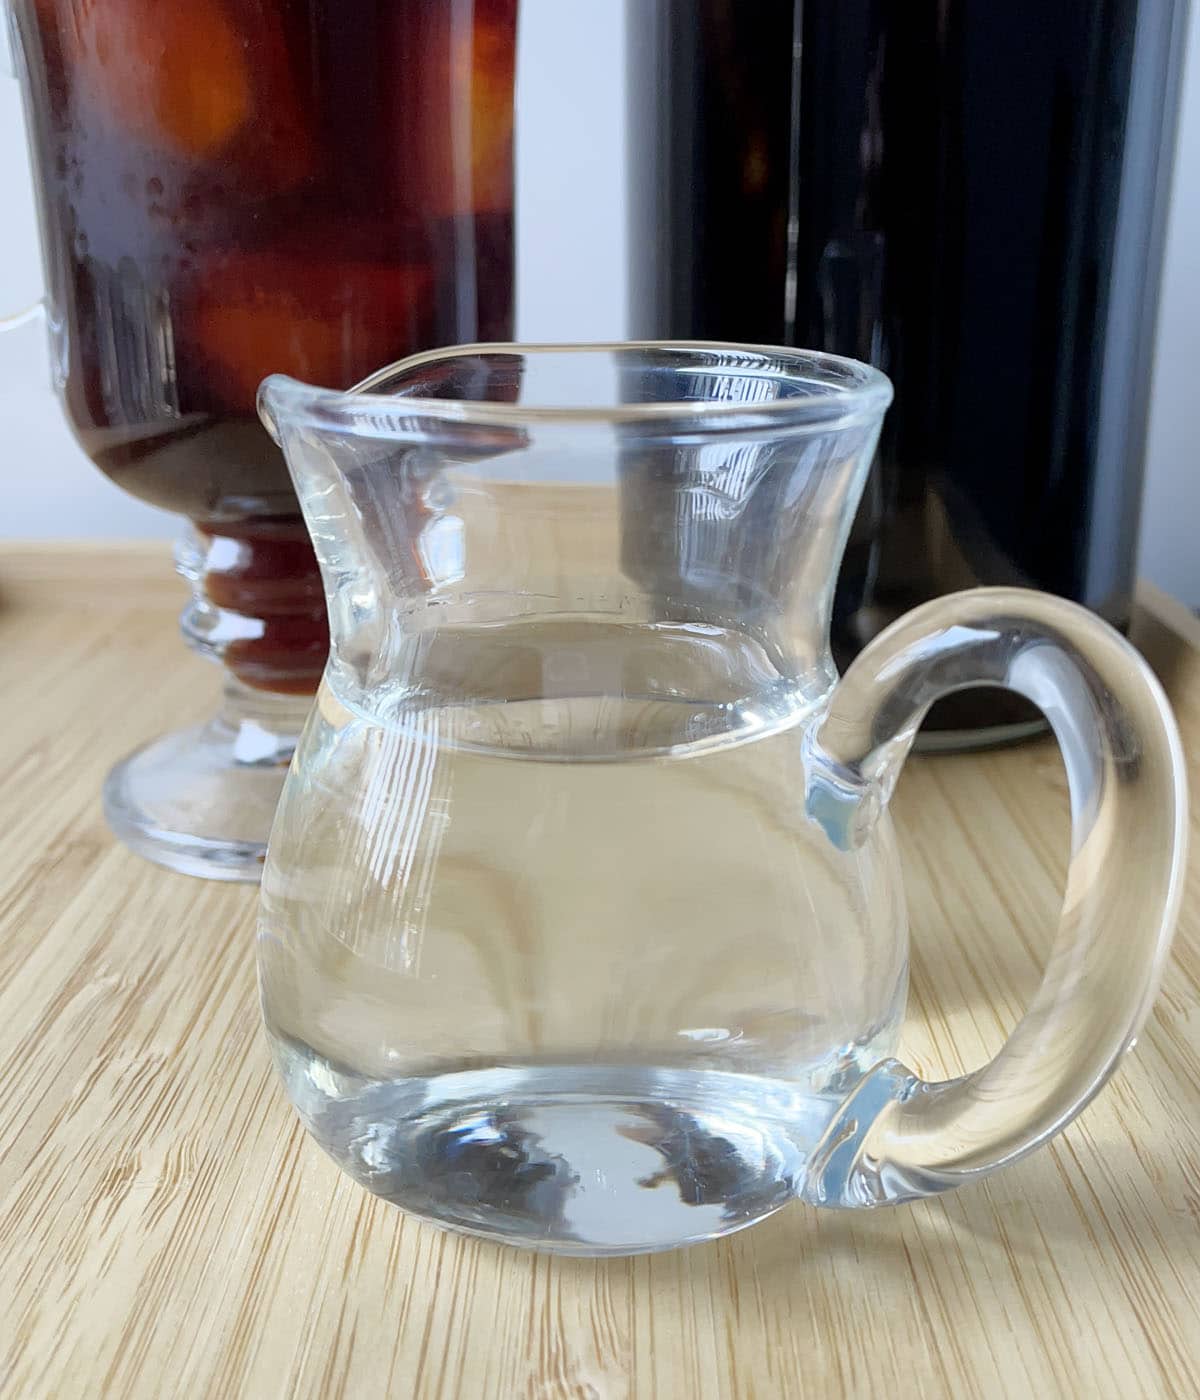 A small glass pitcher of clear simple syrup in front of a glass of iced coffee and a bottle of brown liquid.